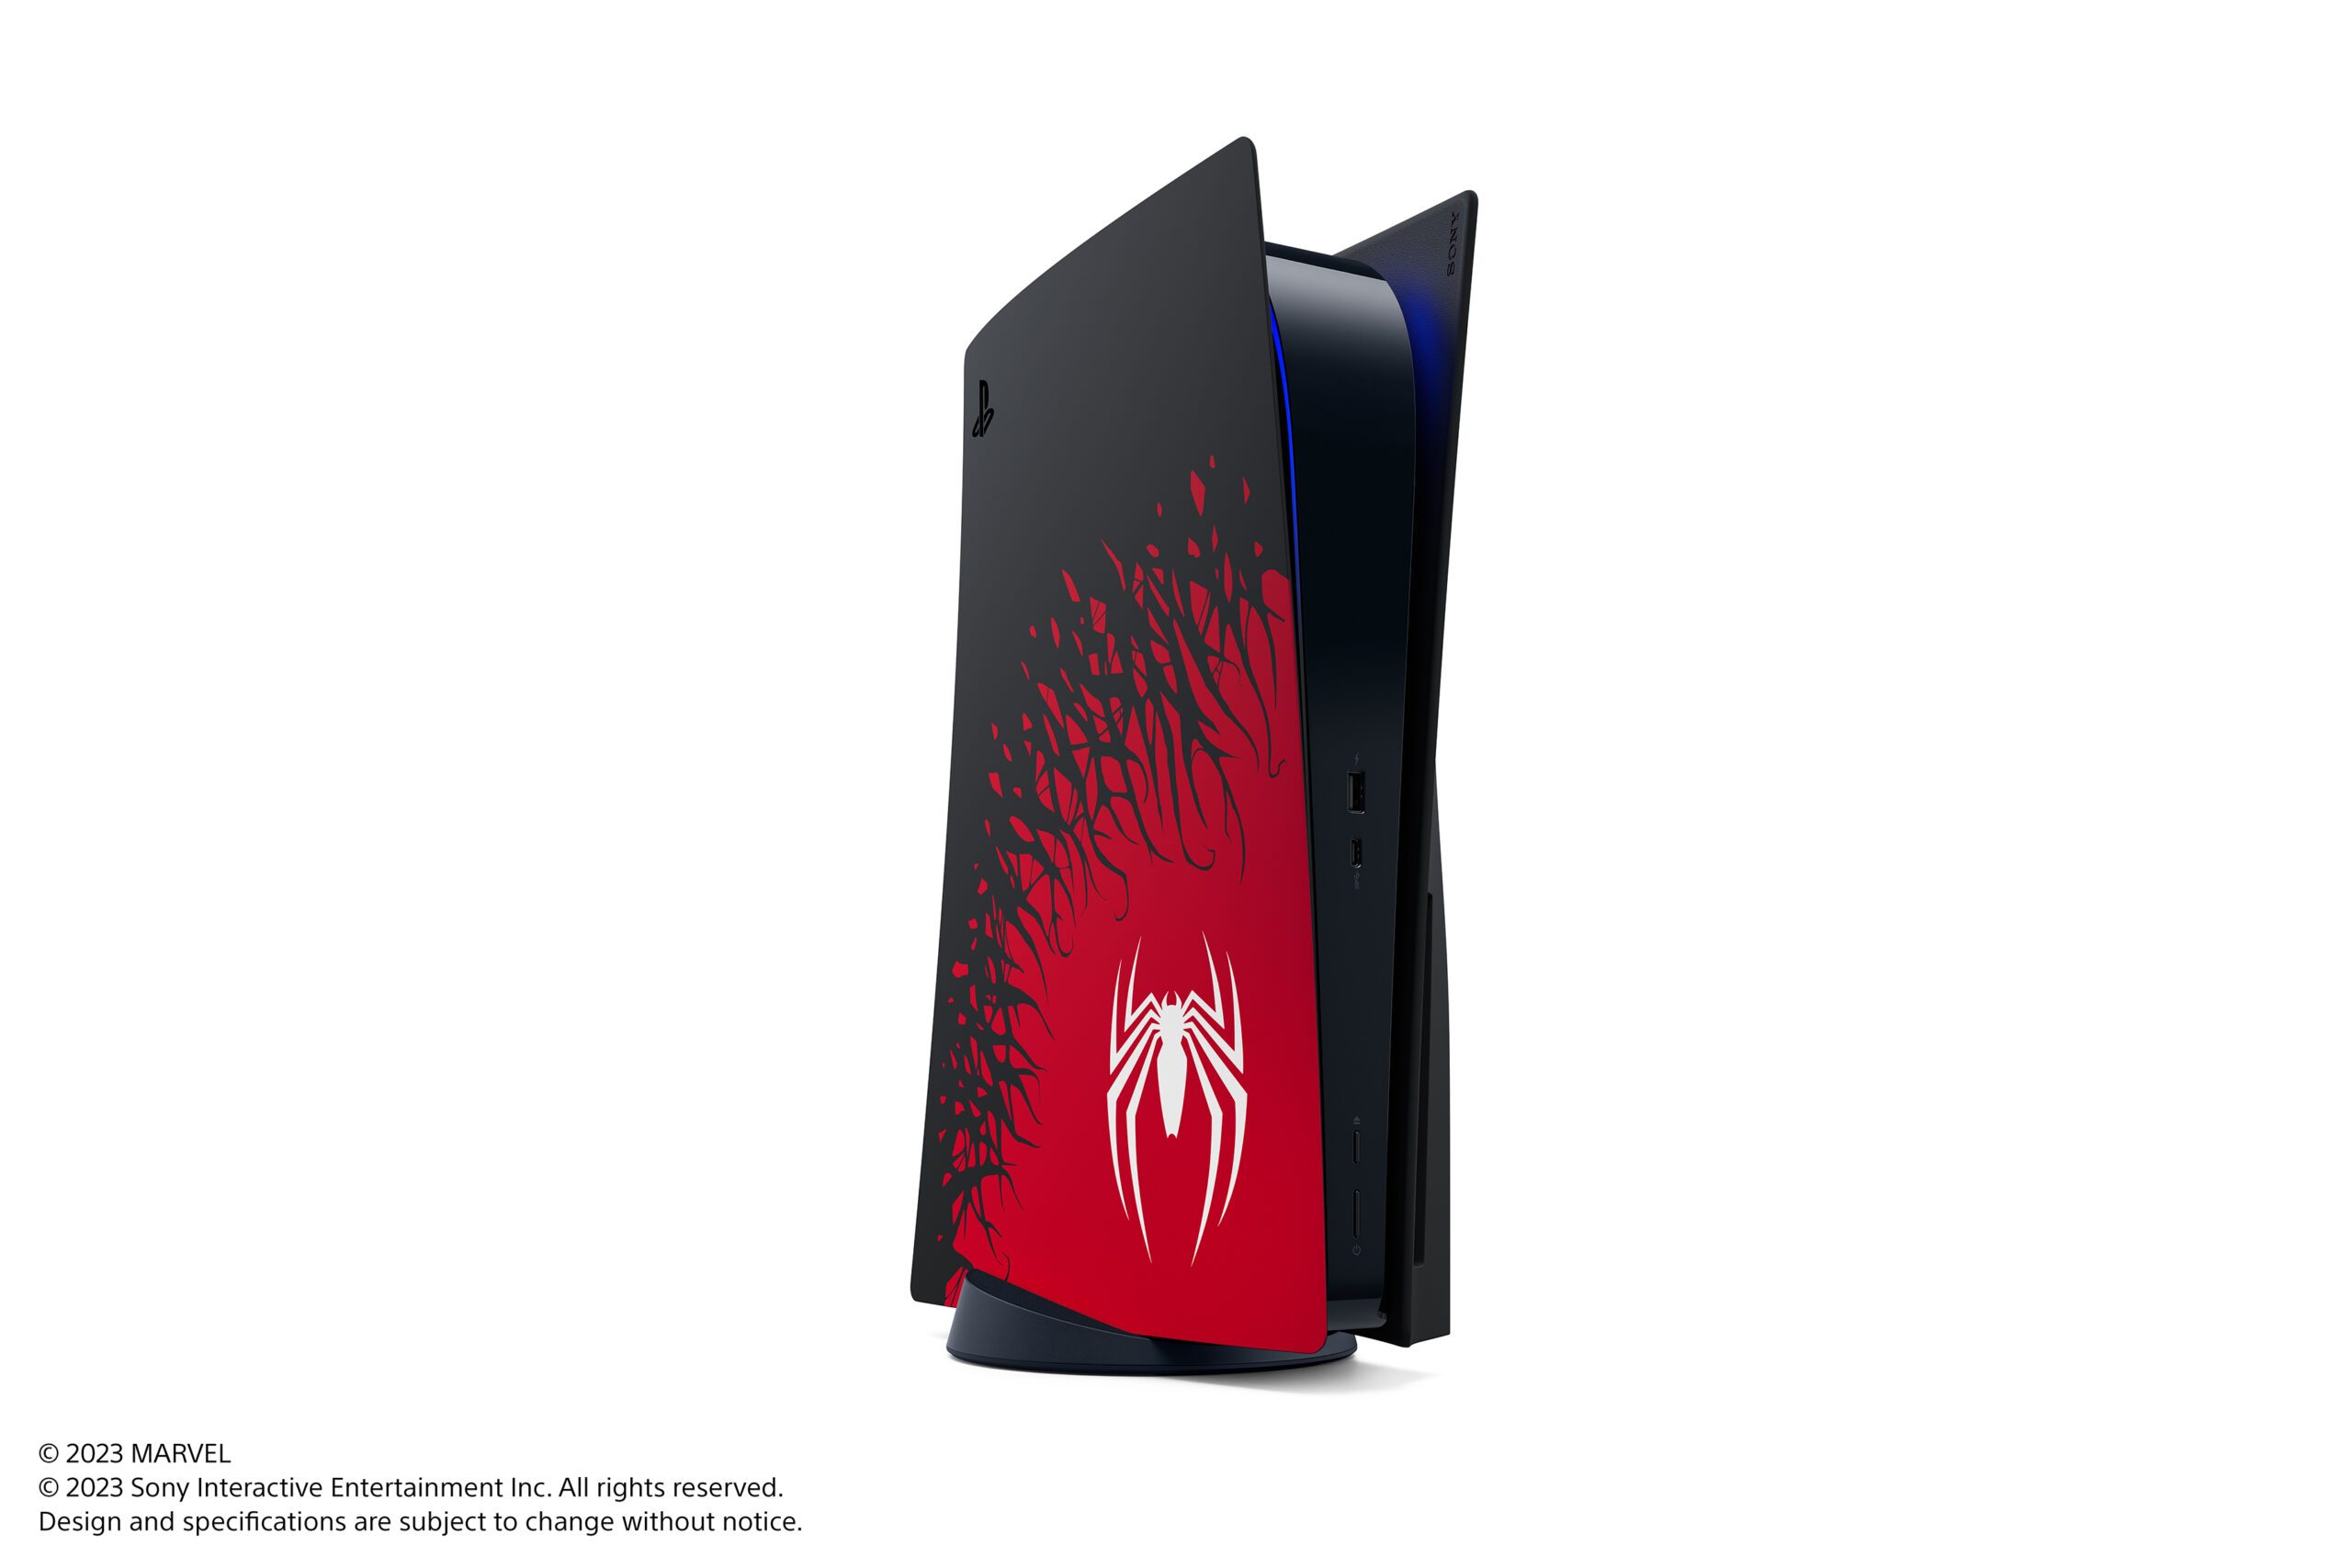 Marvel's Spider-Man 2 Launch Edition PlayStation 5 1000038679